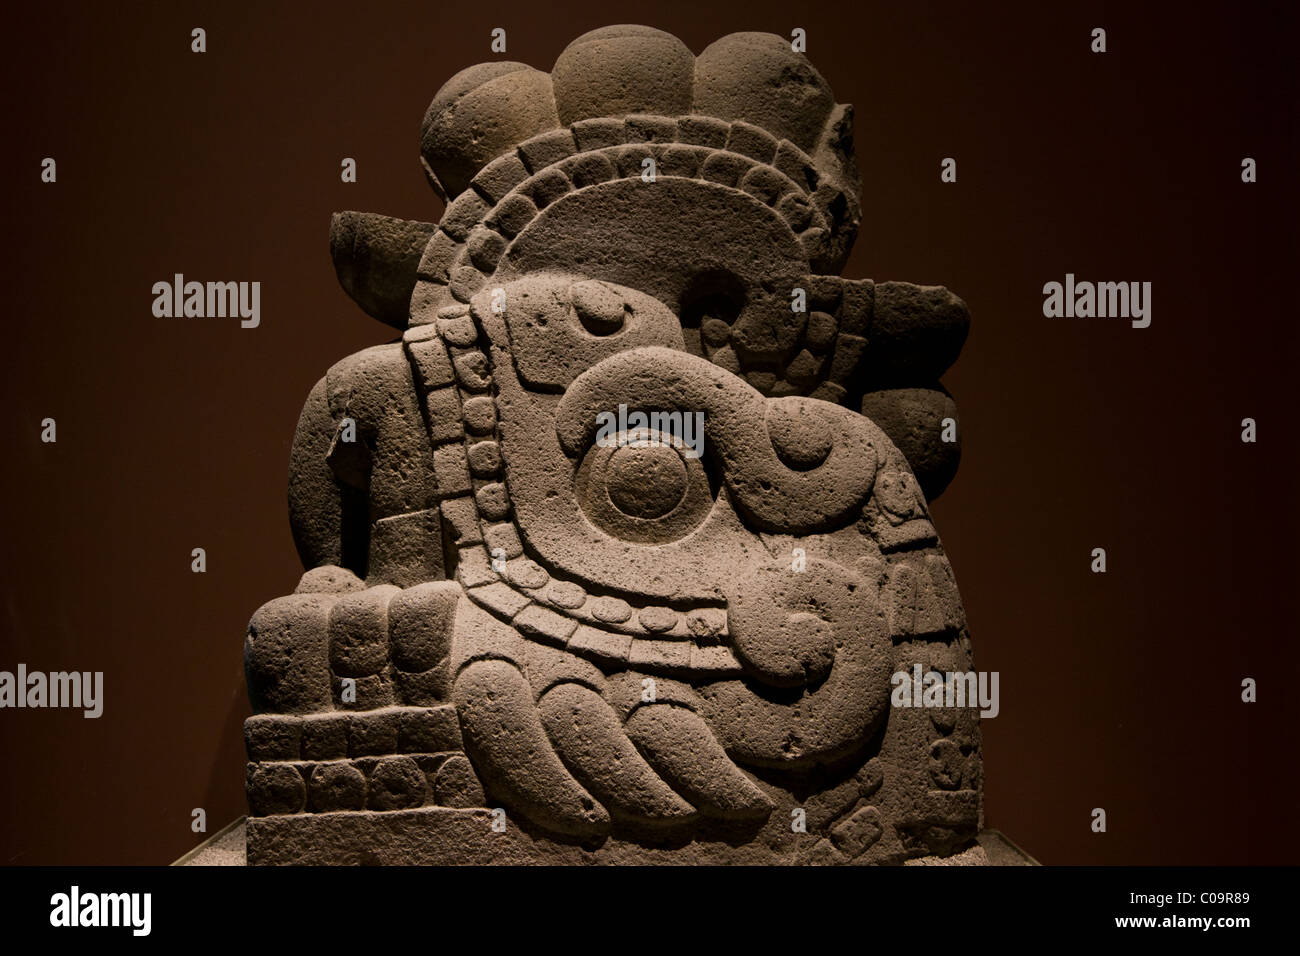 Aztec, Mexica, fire serpent god Xiuhcoatl statue found in the the Templo Mayor, National Museum of Anthropology in Mexico City. Stock Photo